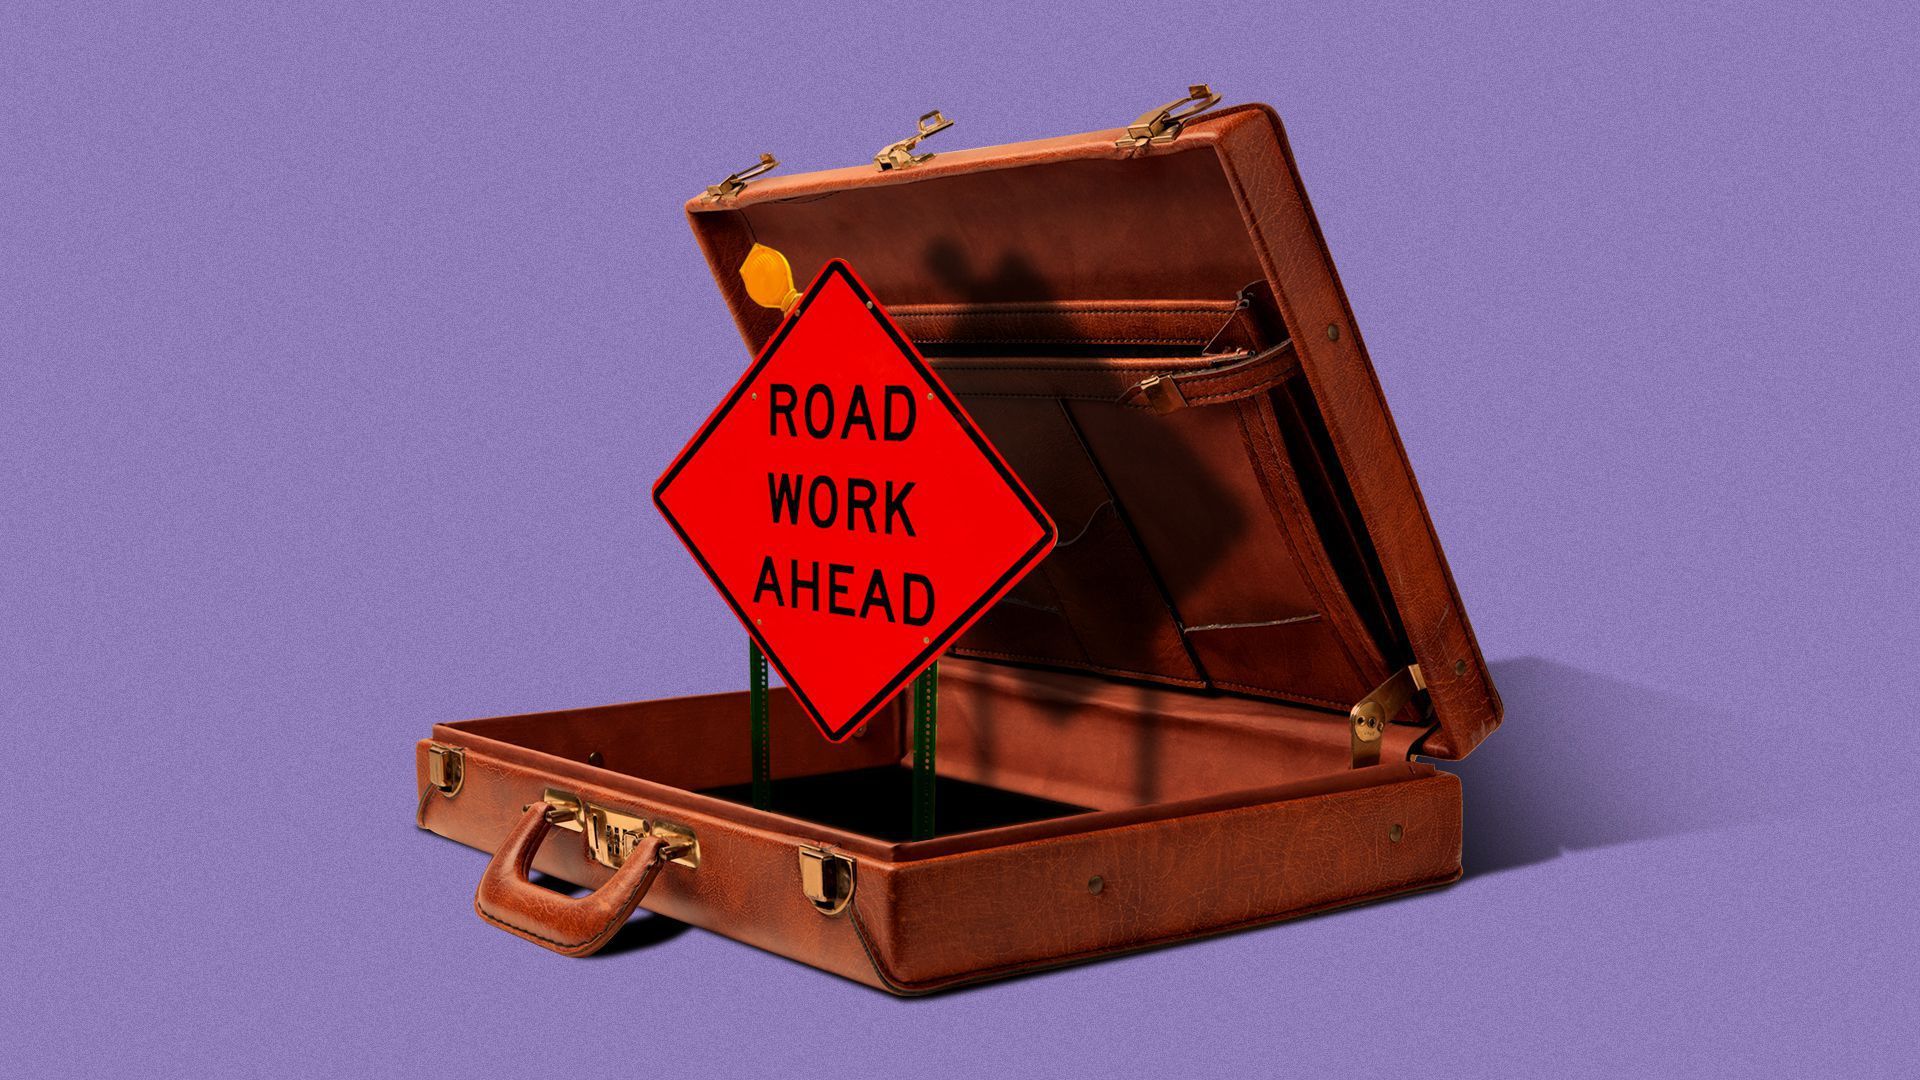 A briefcase with a "Road Work Ahead" sign in it/ 